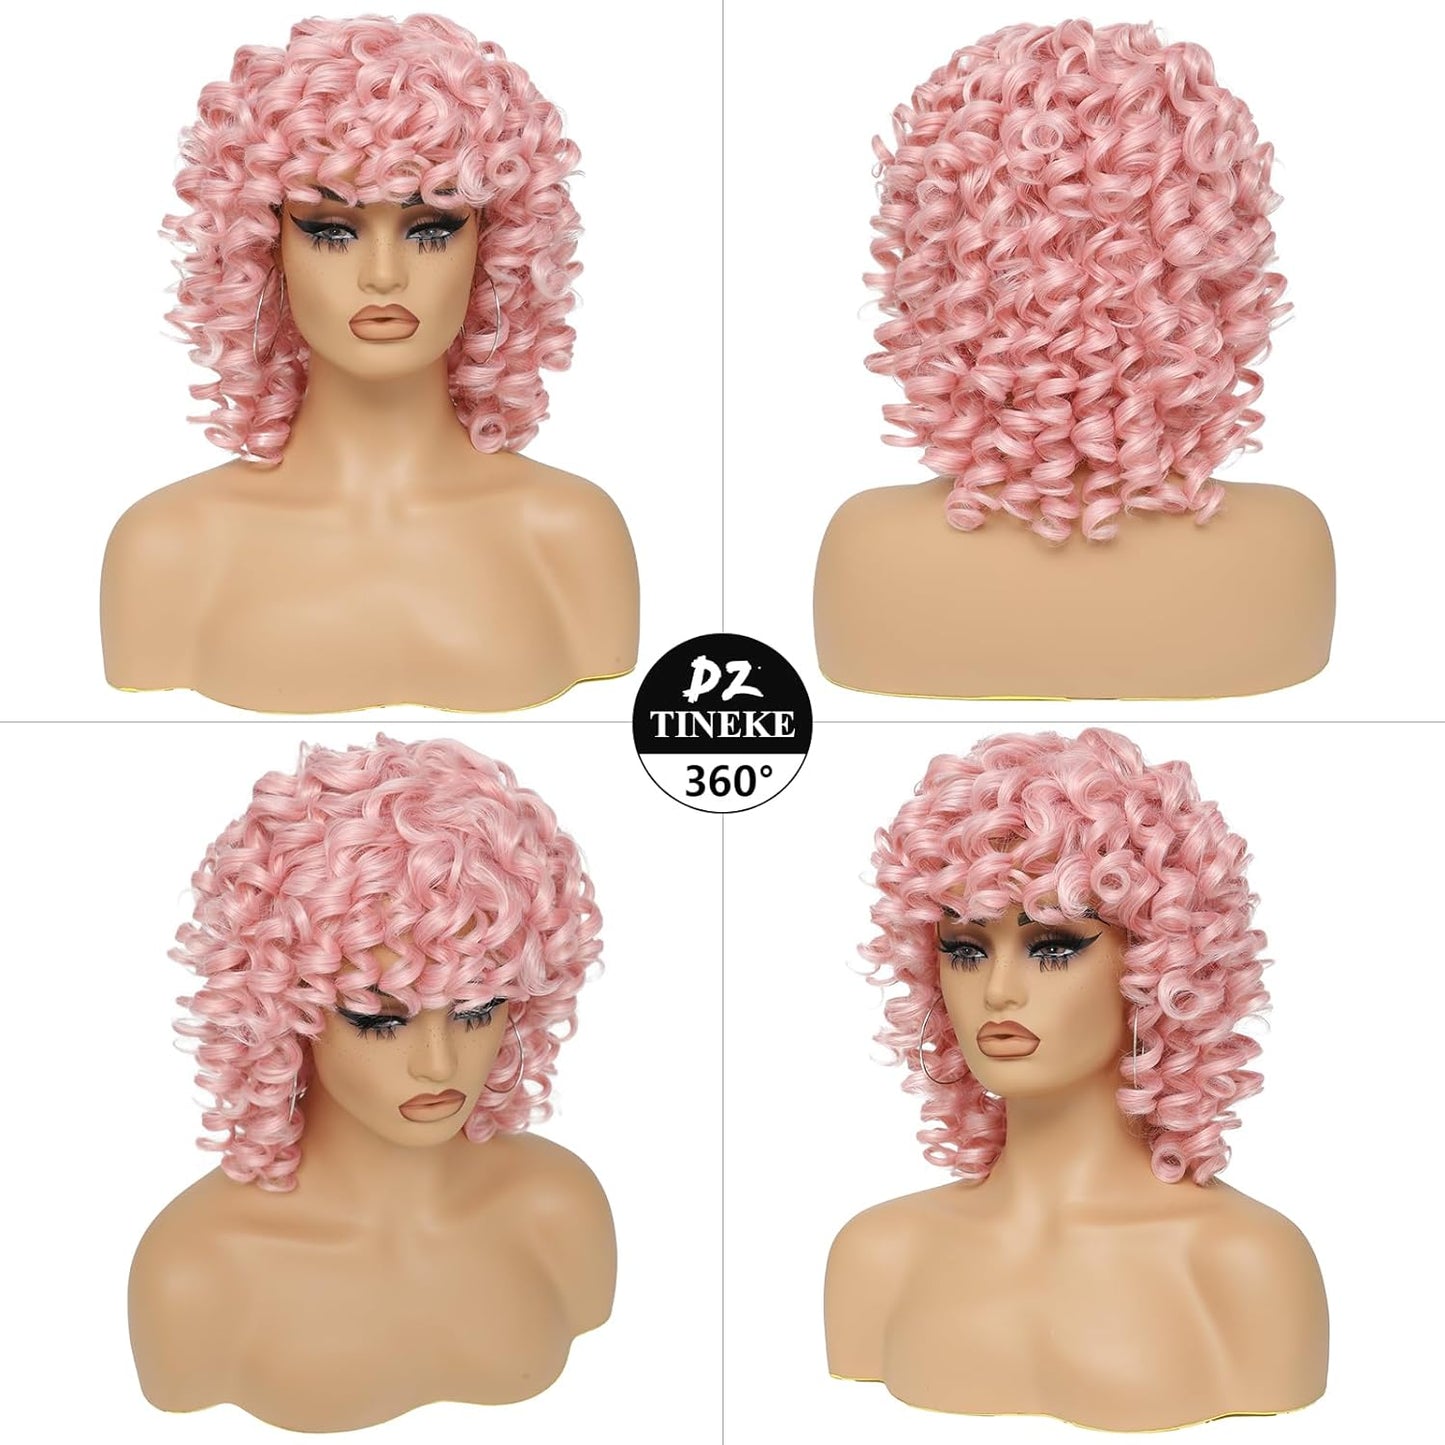 14 Inch Curly Wigs for Black Women Short Curly Wig with Bangs Big Loose Cute Kinky Curly Hair Synthetic Soft Wigs for Daily Party Cosplay (Black)